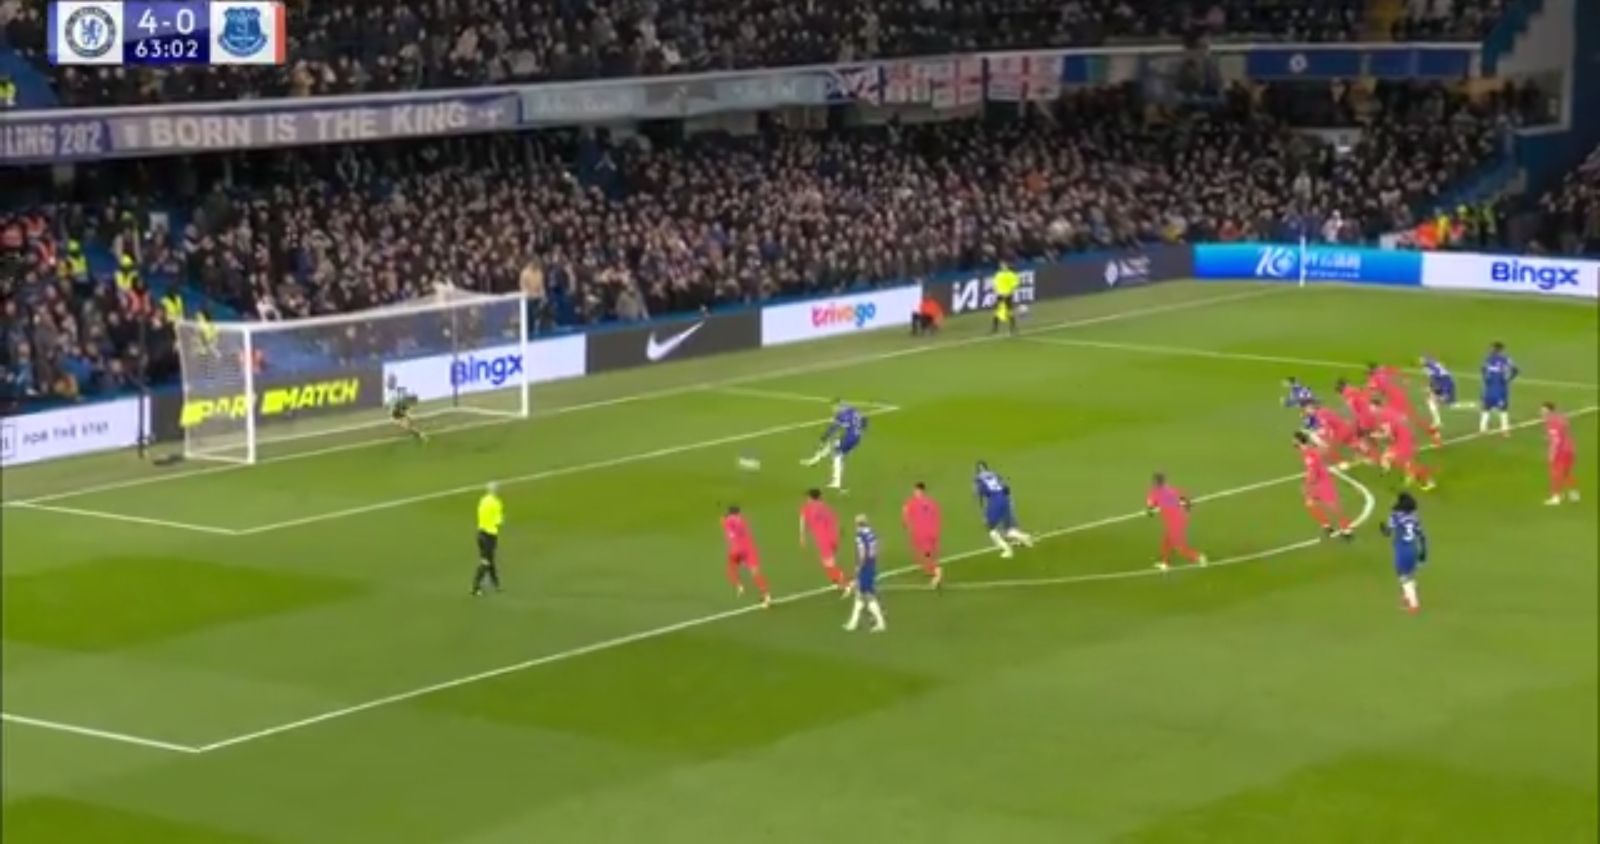 Watch: Cole Palmer converts from the spot to make it 5-0 for Chelsea